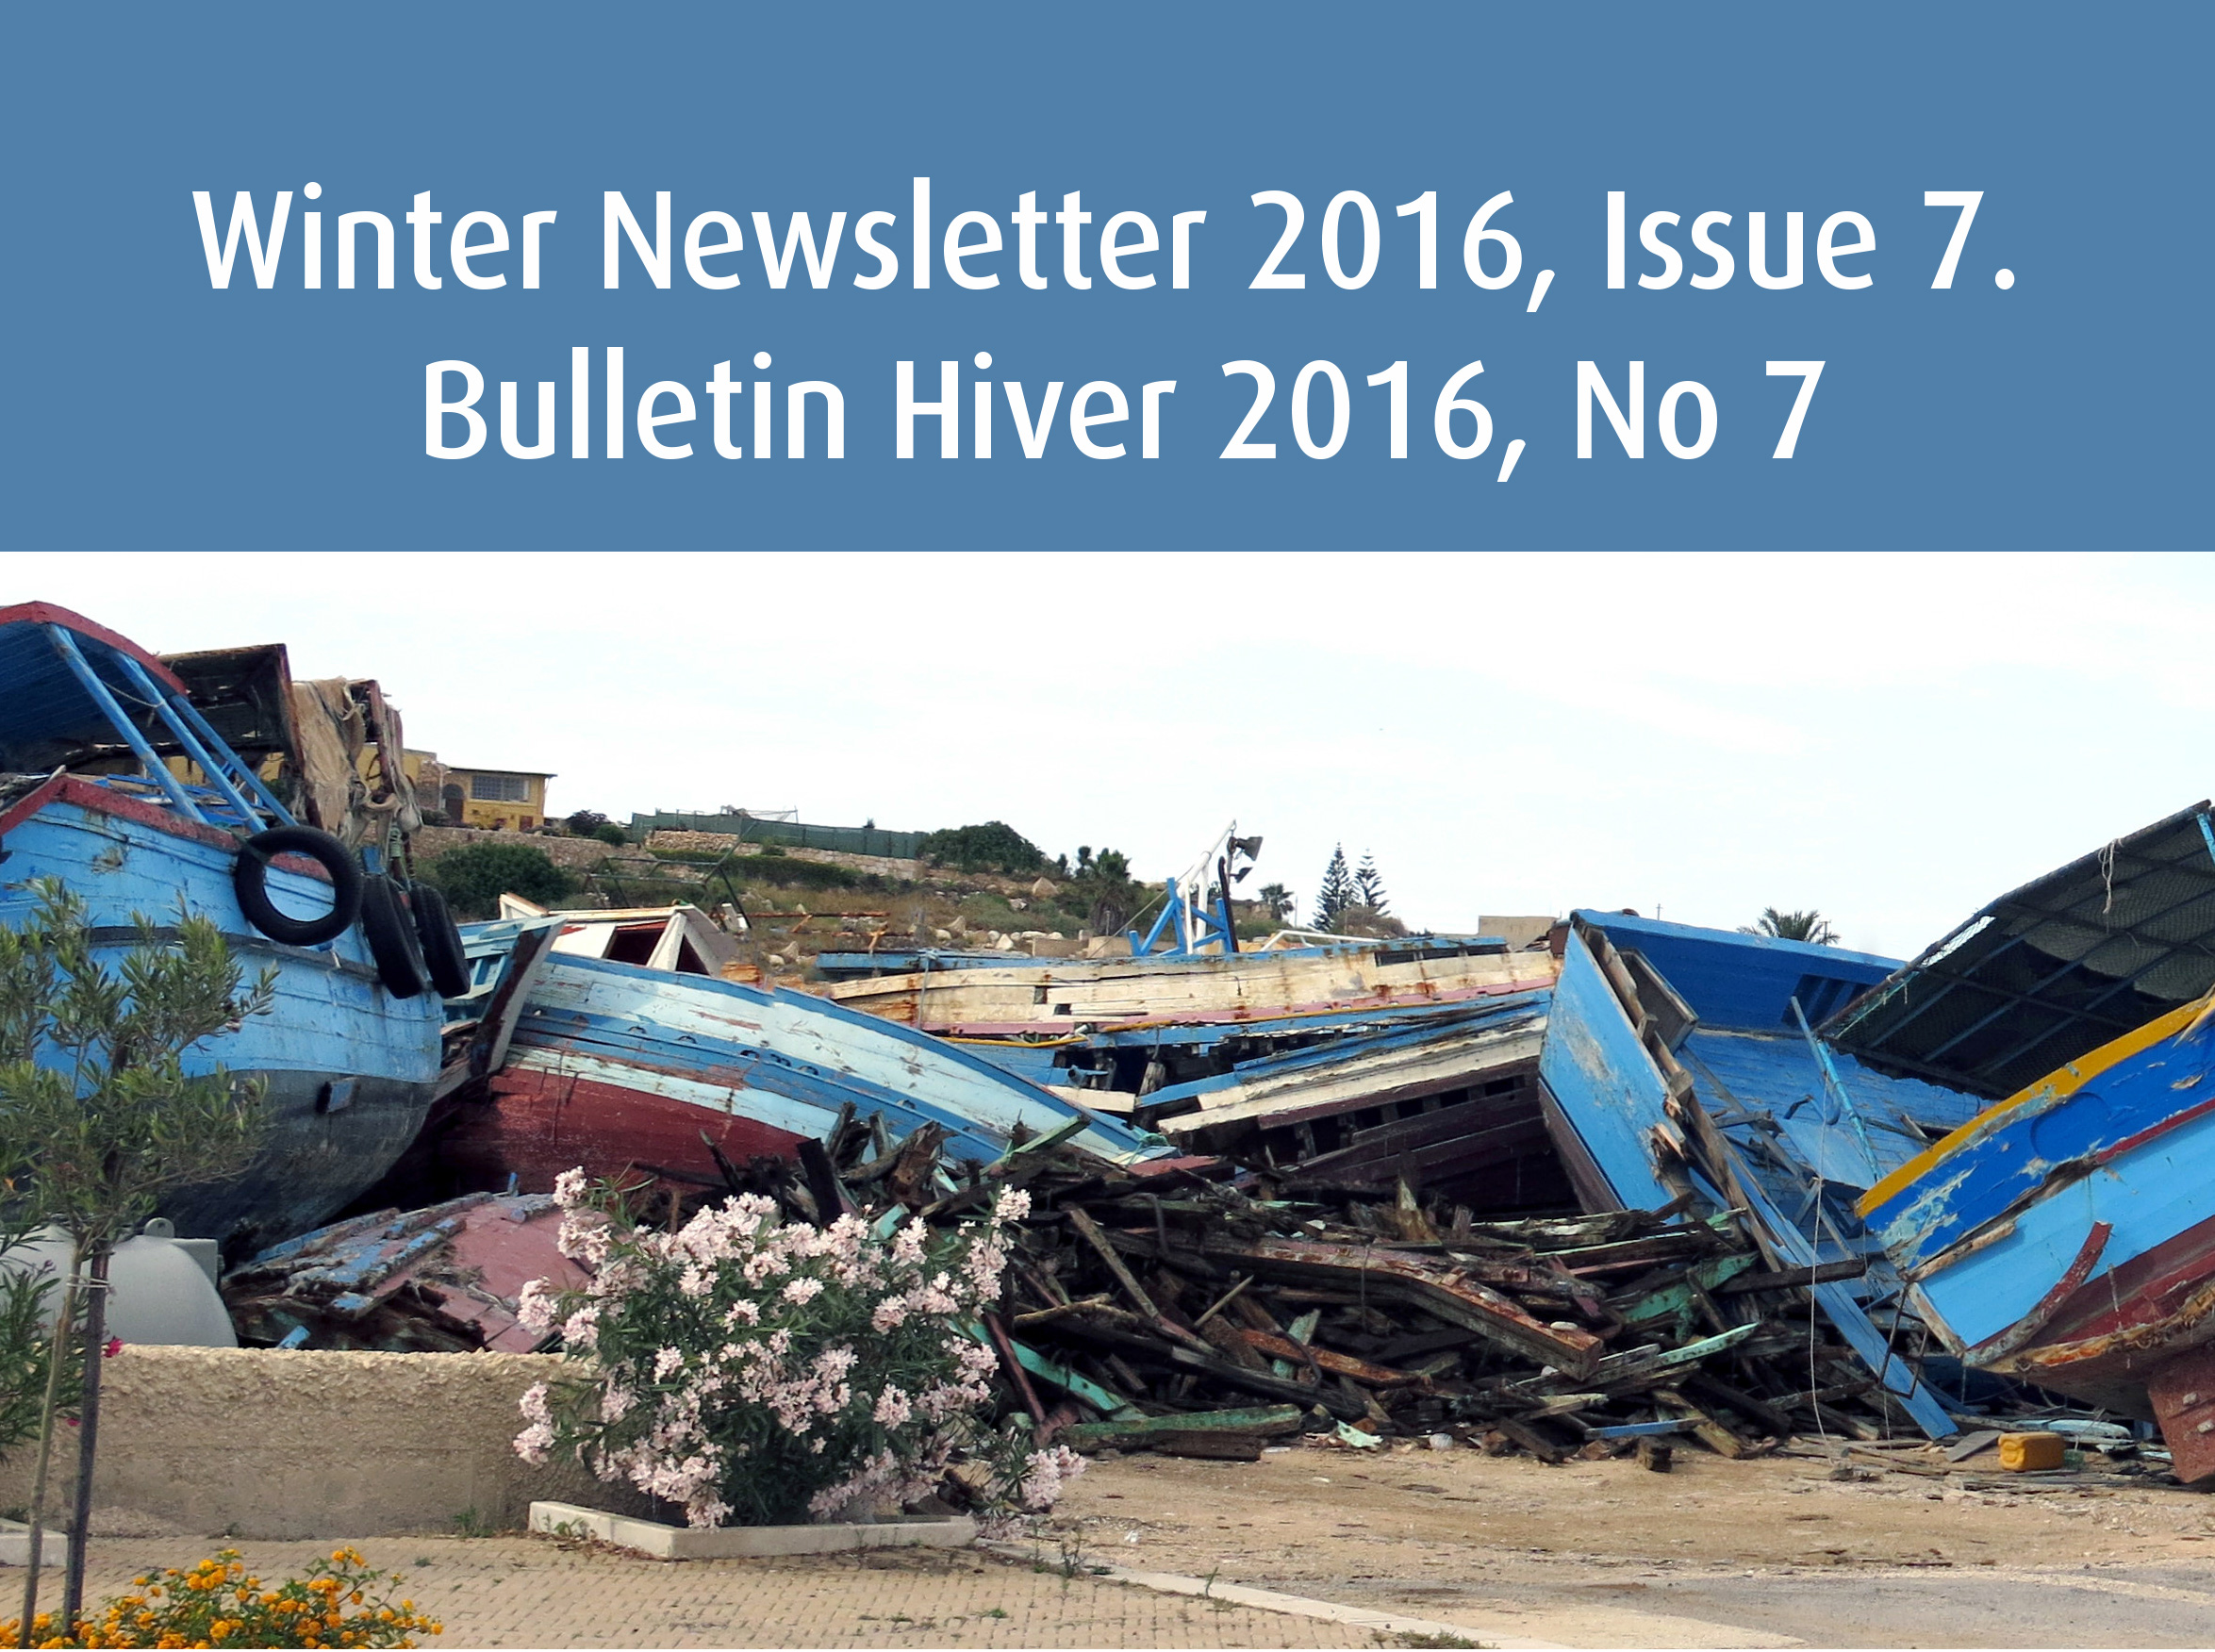 CARFMS/ACERMF Newsletter, Winter 2016, Issue 7, is now available